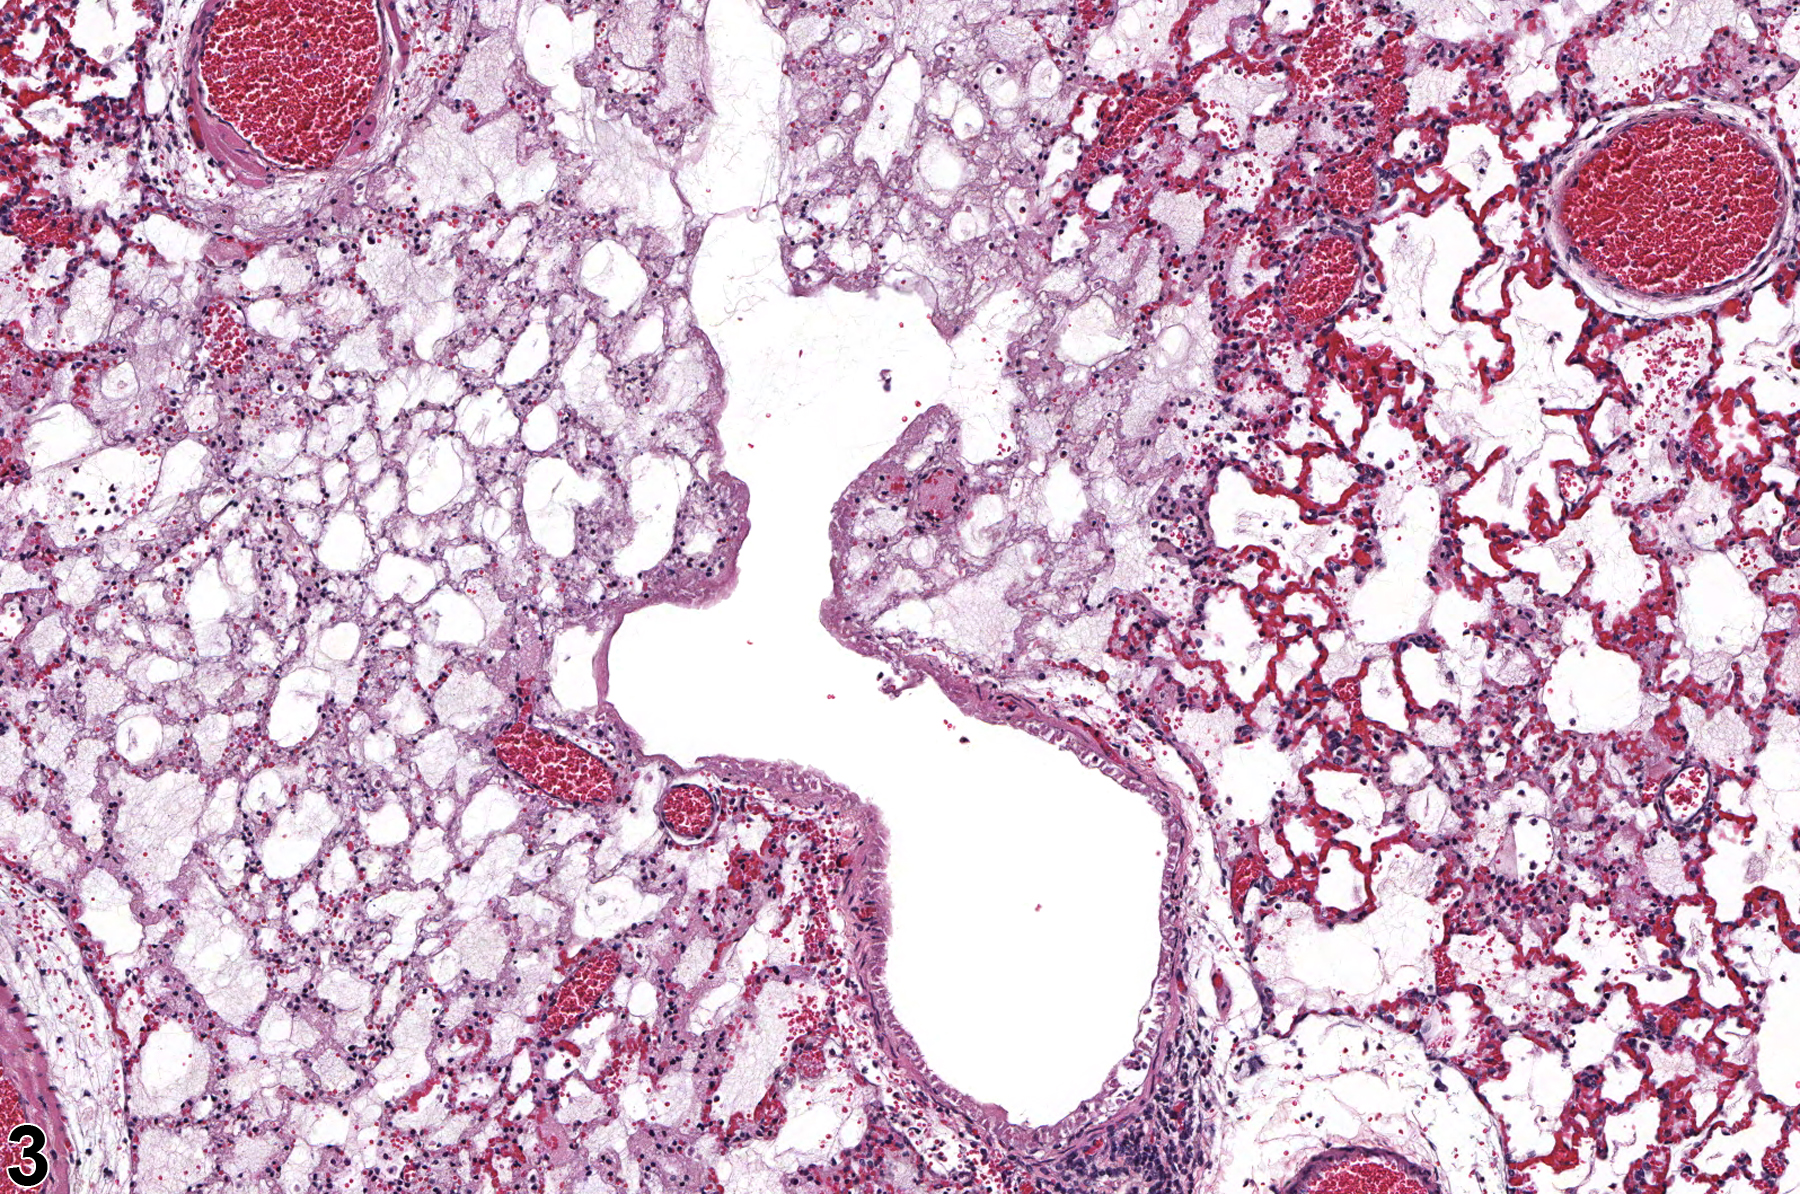 Image of epithelial necrosis in the lung from a female F344/N rat in a subchronic study